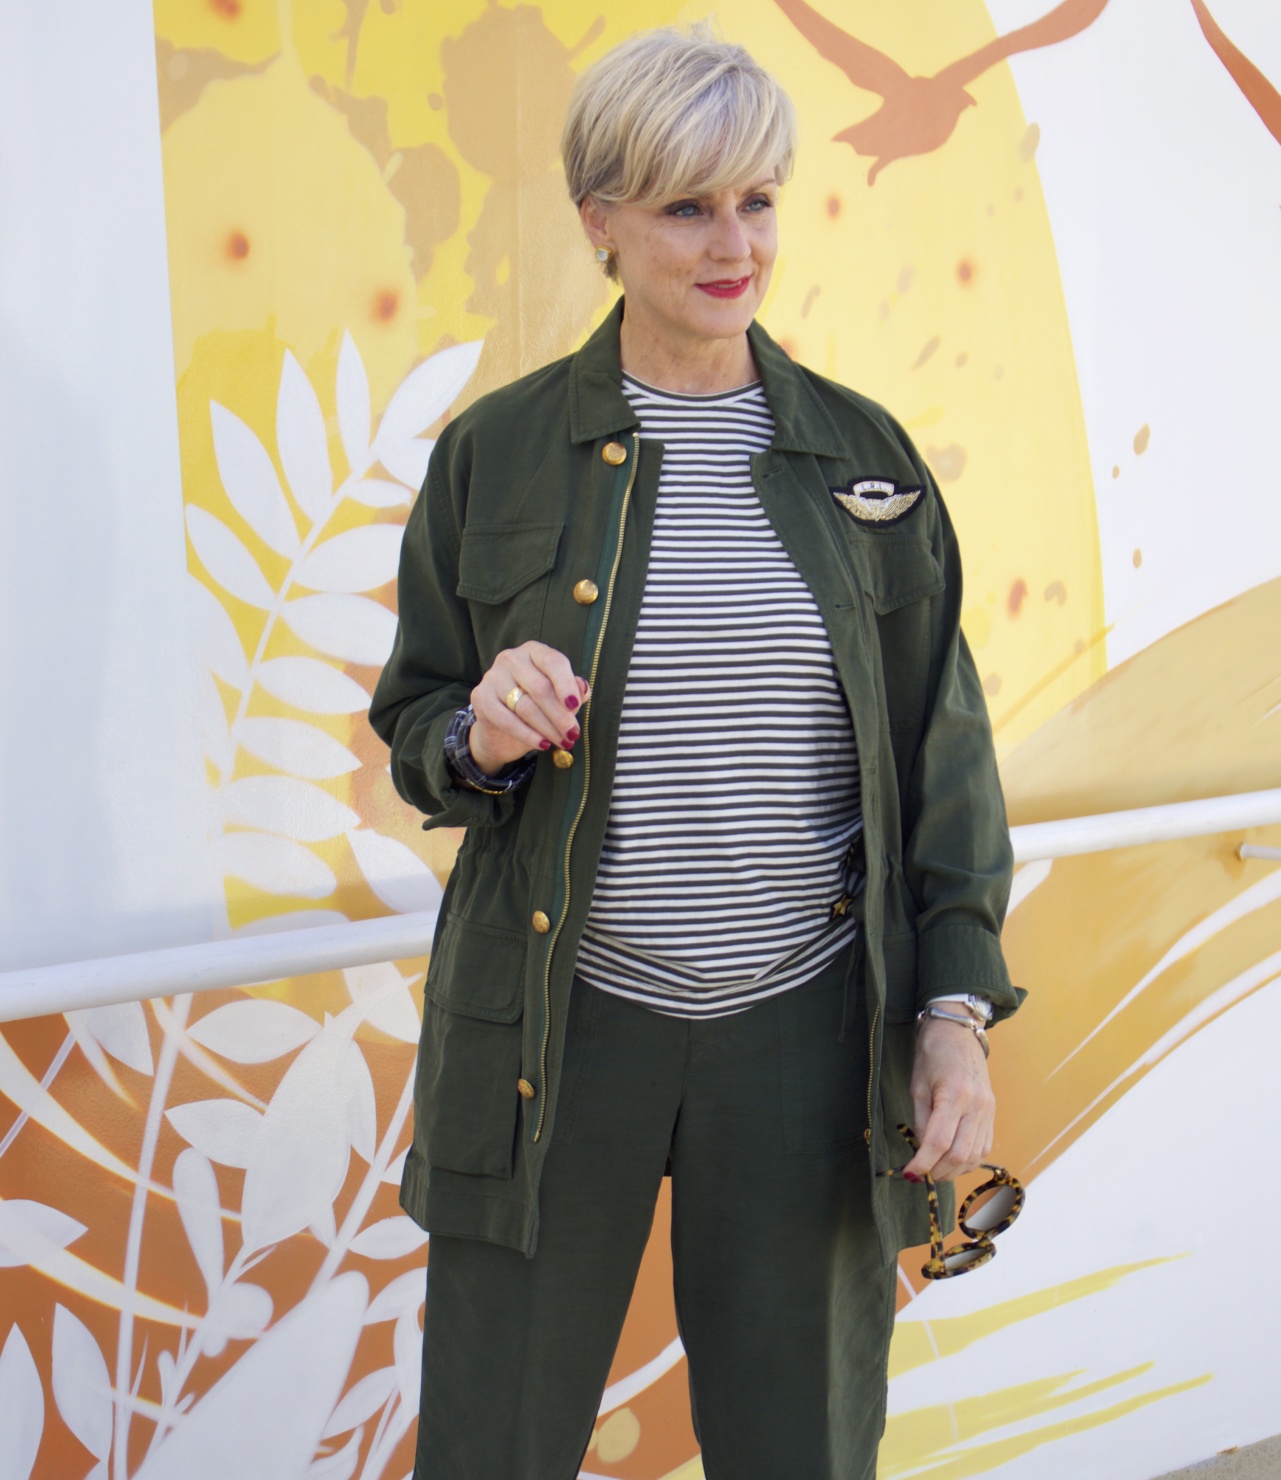 beth from Style at a Certain Age wears a Ralph Lauren military jacket, striped tee, and green cropped pants